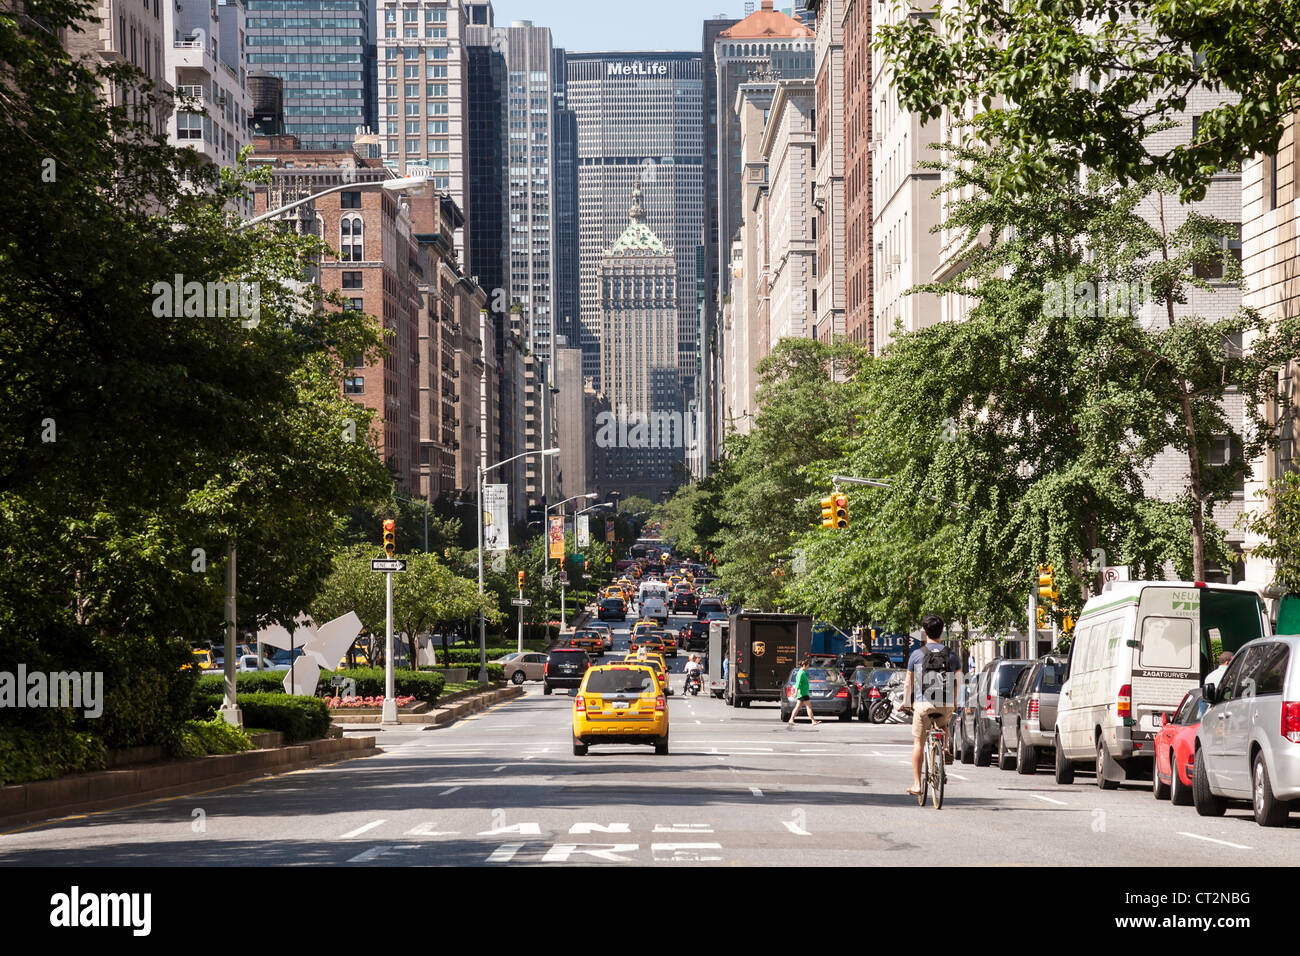 Park Avenue on the Upper East Side of Manhattan, NYC Stock Photo